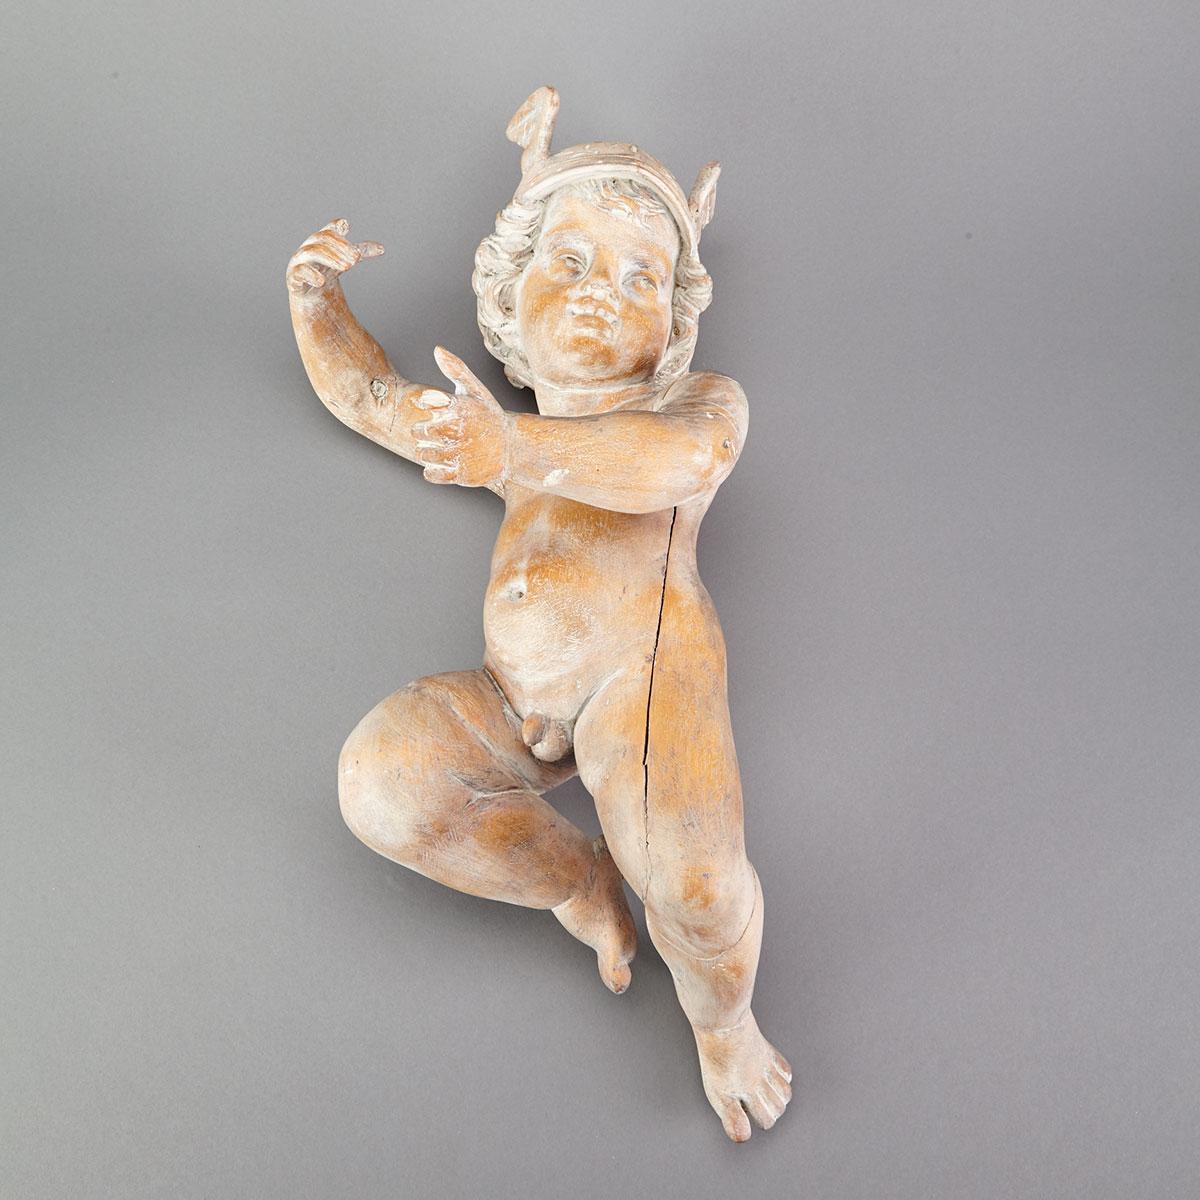 Carved Figure of The Young Mercury, 19th century